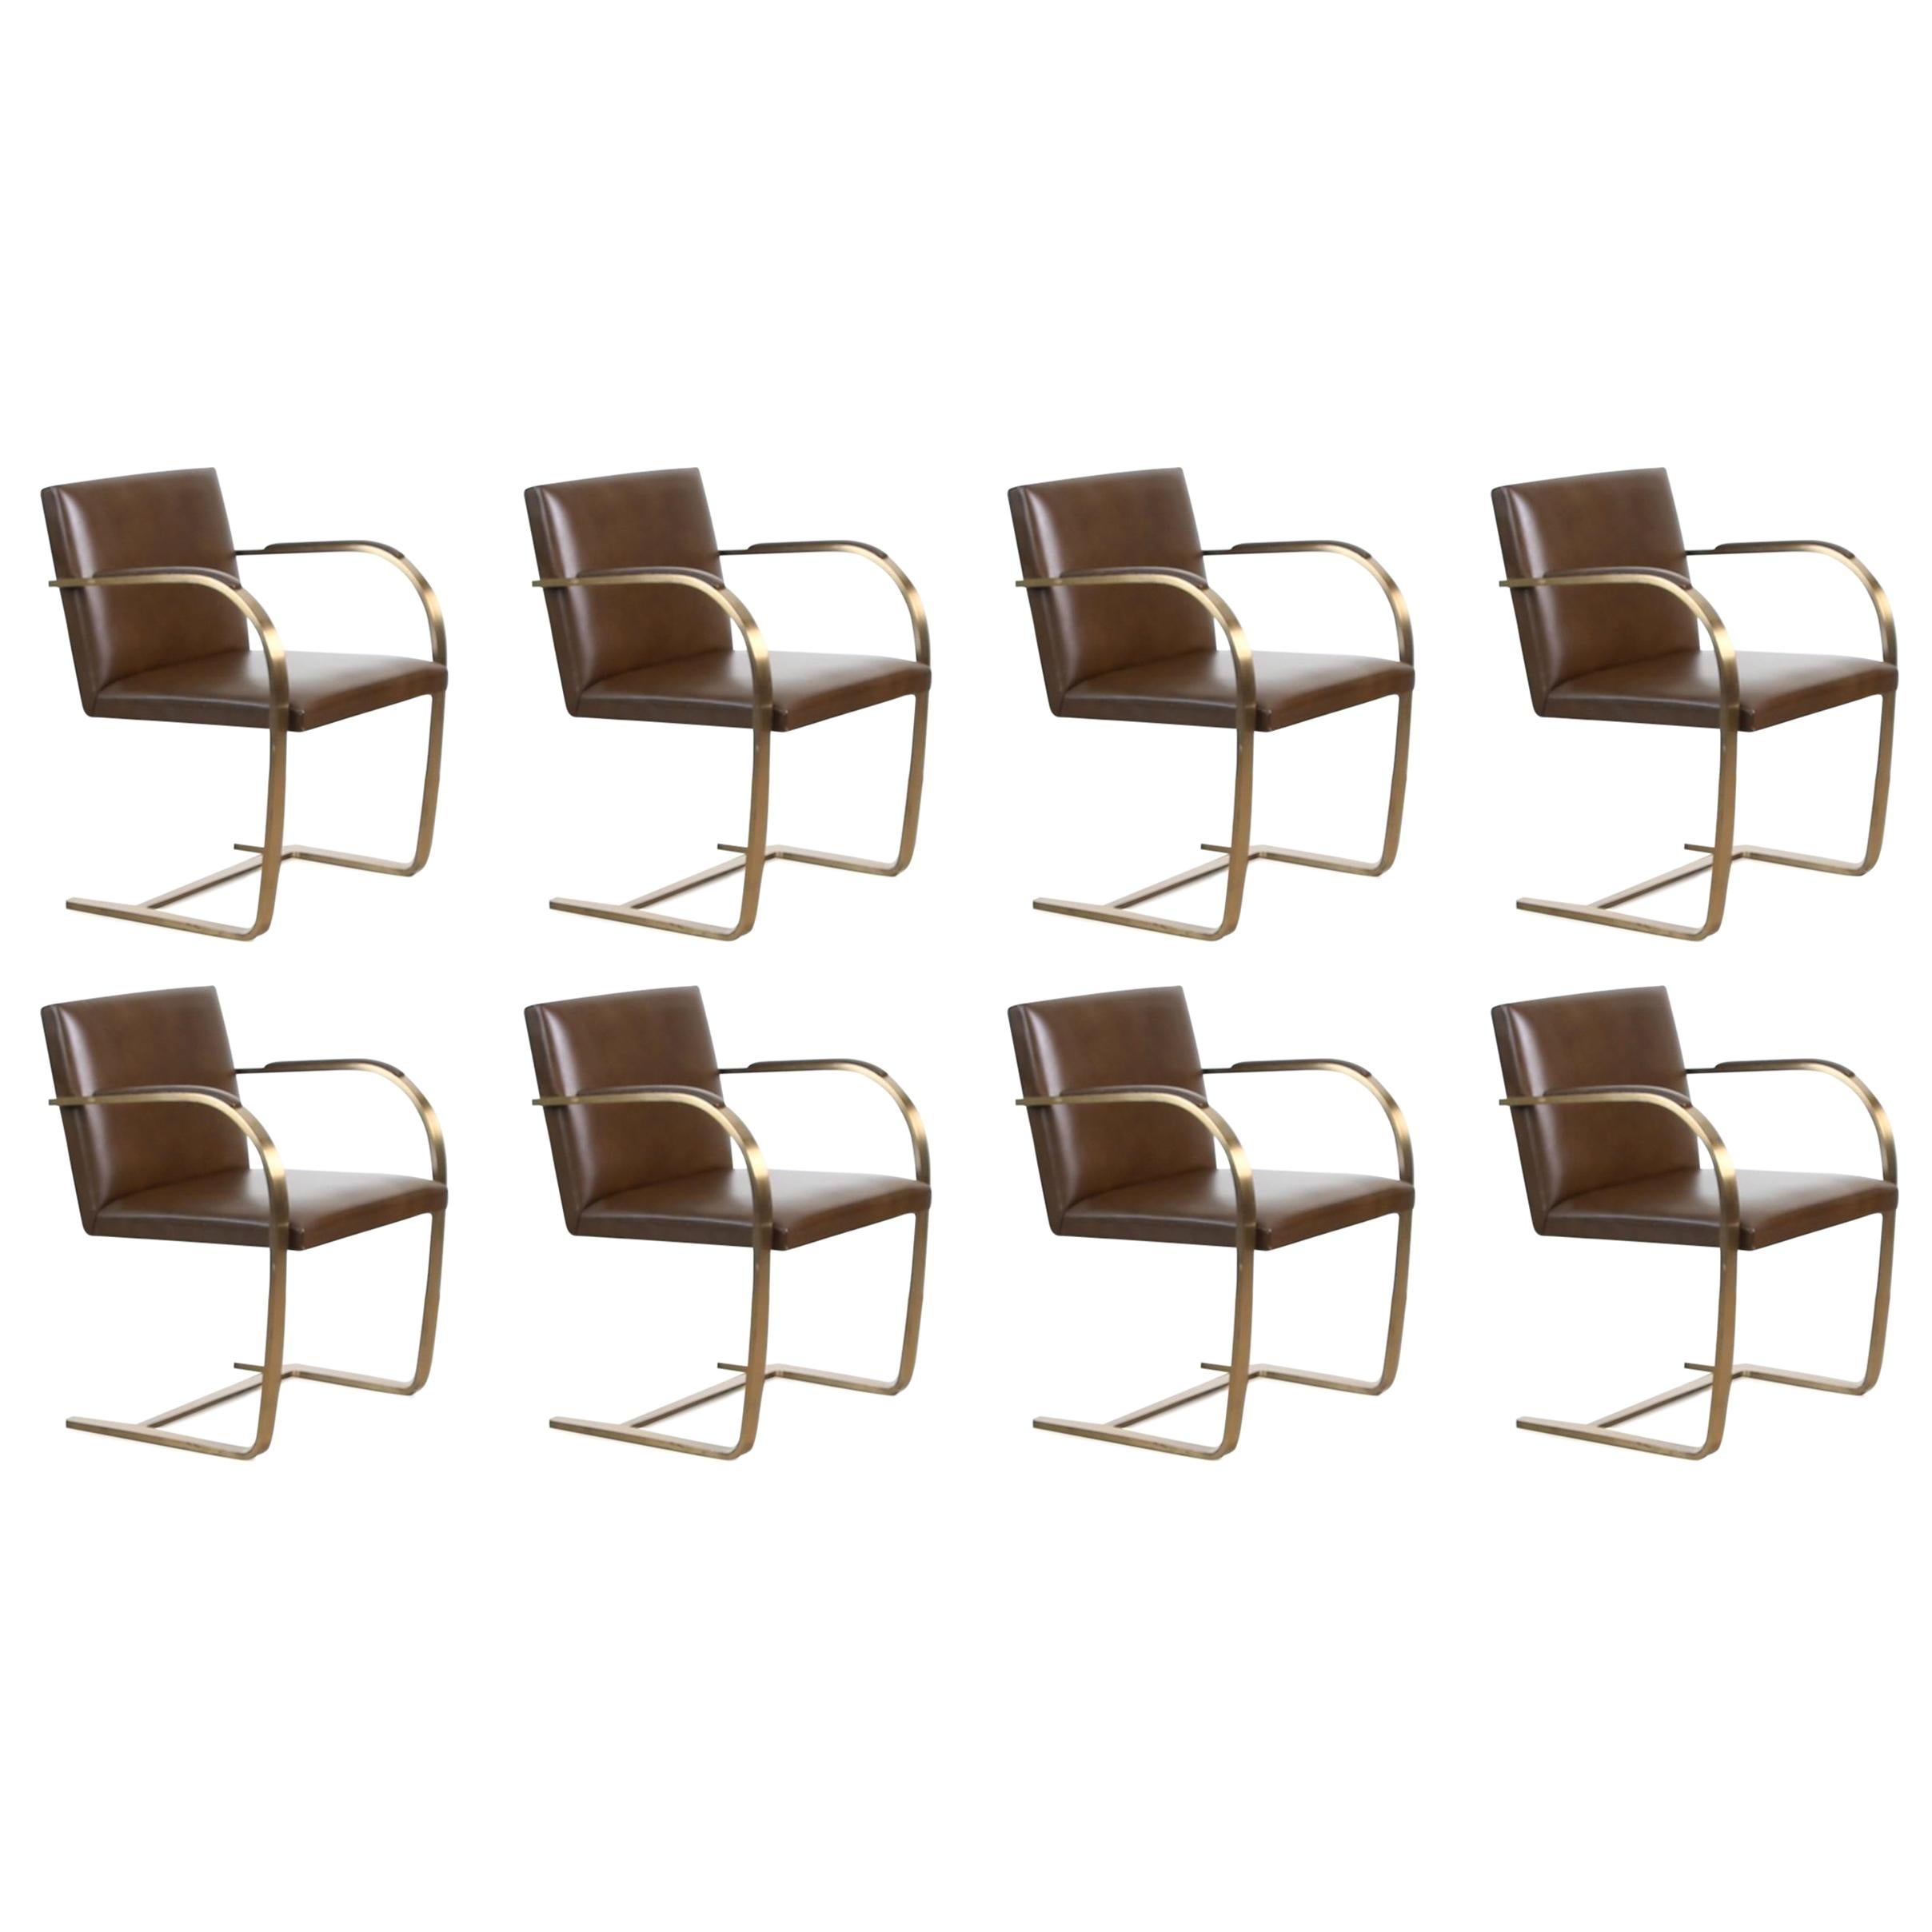 Brass "Brno" Chairs by Mies Van Der Rohe for Knoll International, Signed 1976